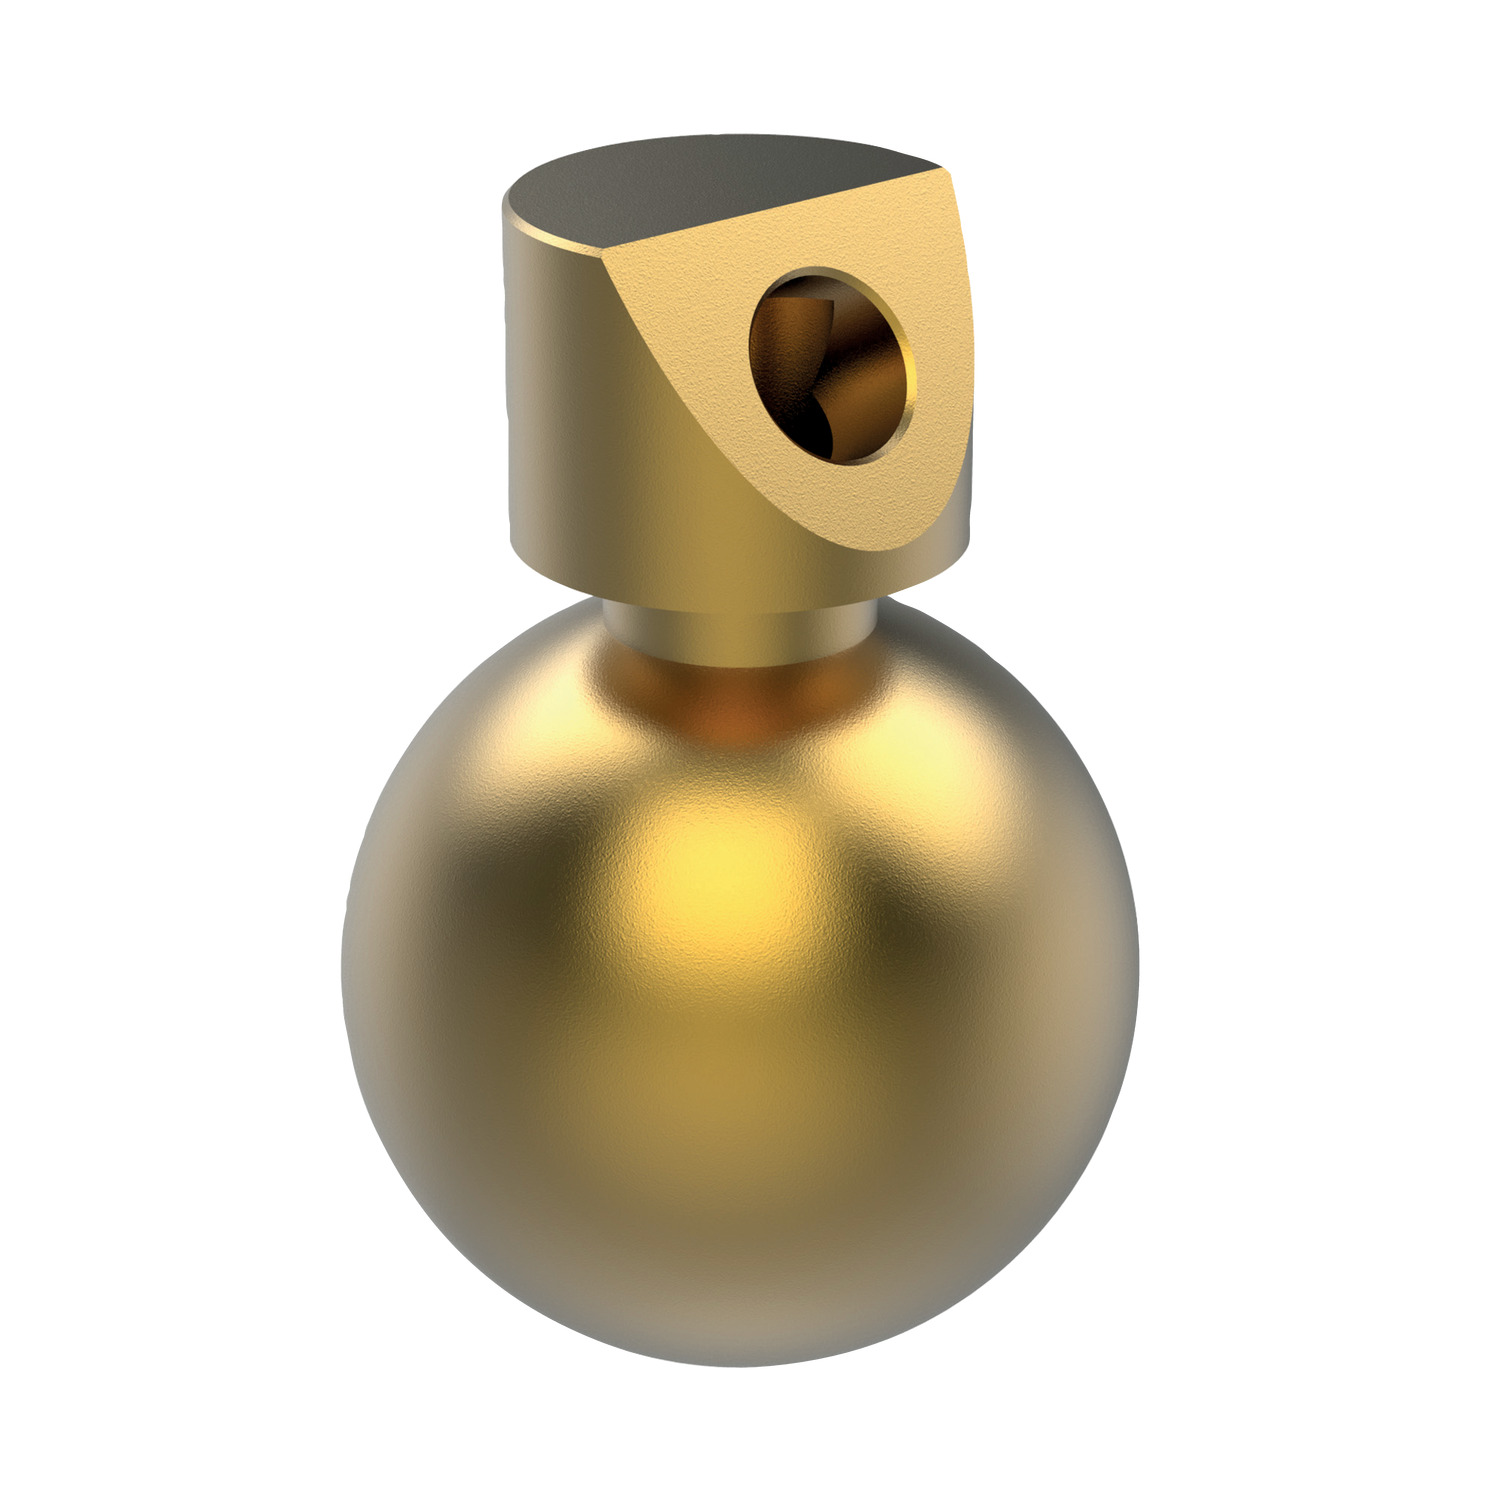 20074.W0100 Coolant Nozzles - Brass Ball - Angled Brass - 10 - 2,8 - 6,35